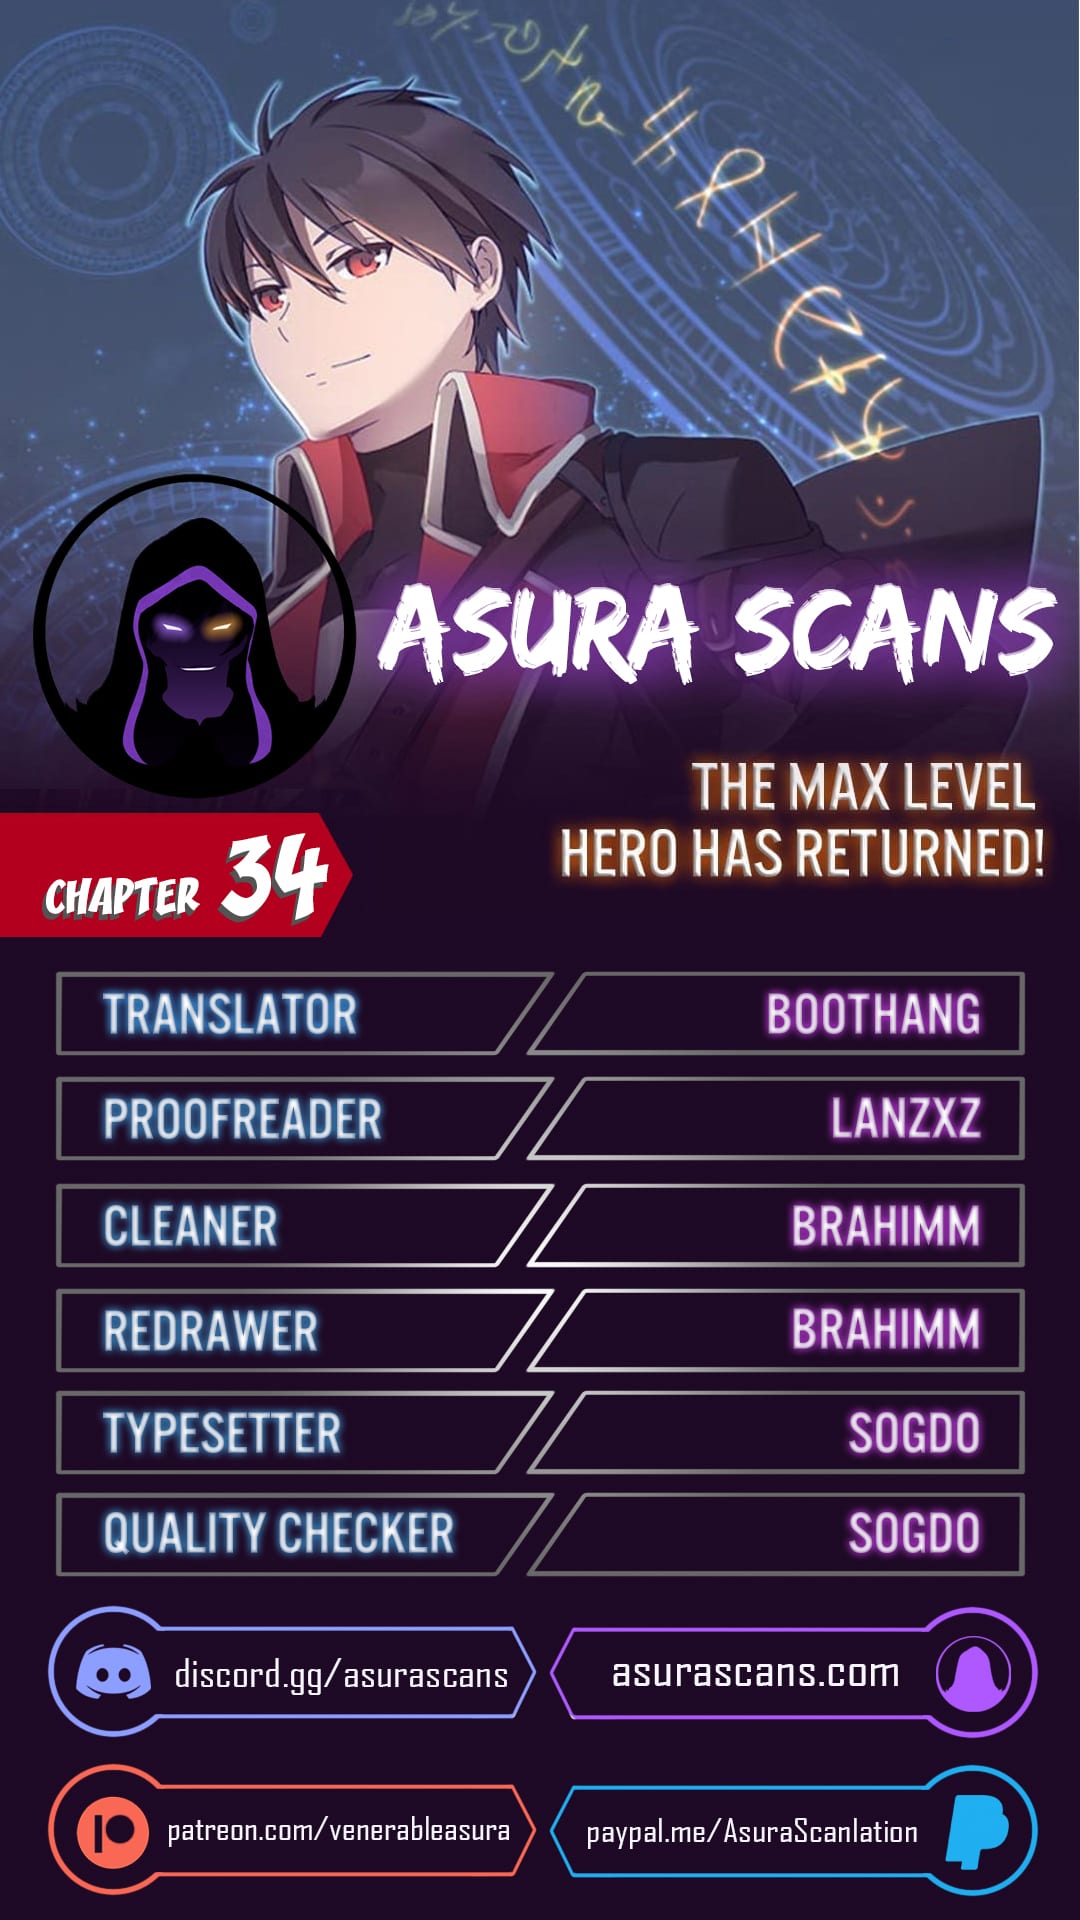 The MAX leveled hero will return! Chapter 34